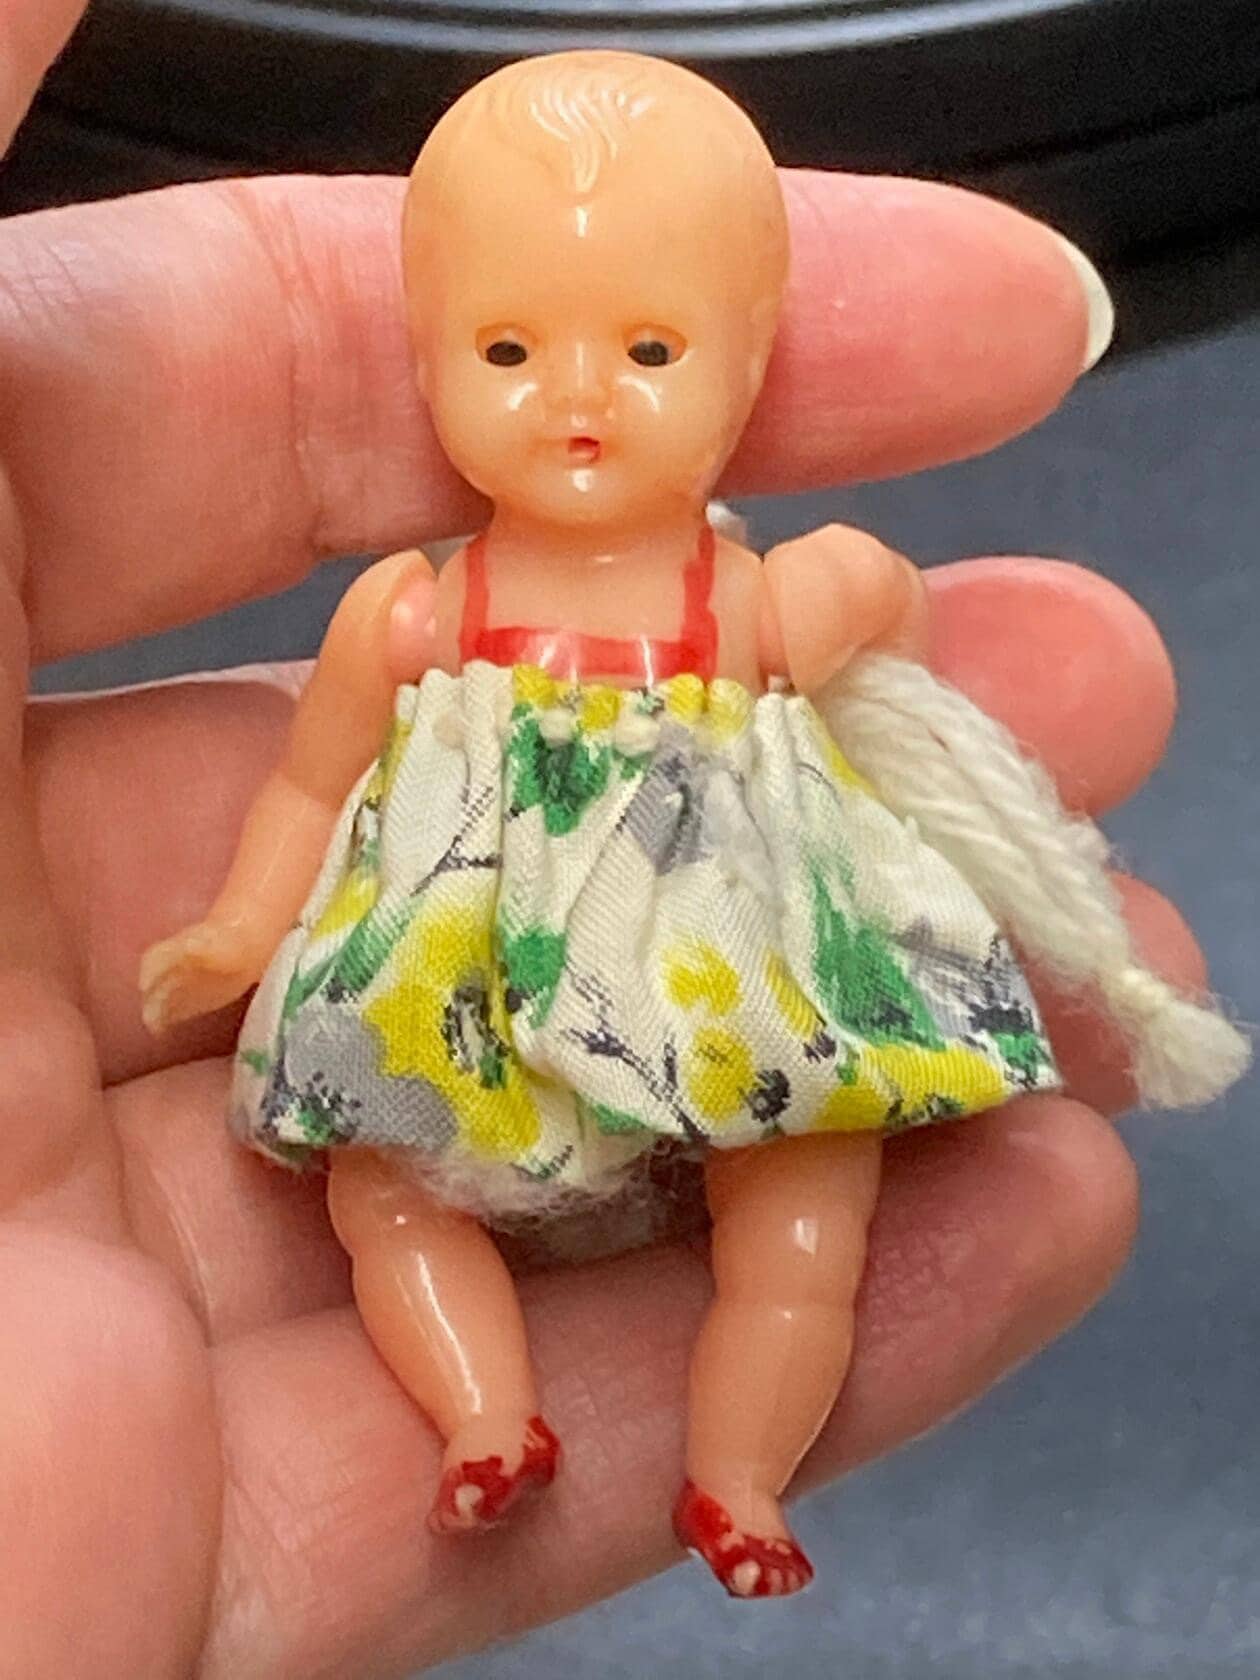 Small Vintage Soft Plastic/rubber Kleeware Sitting Baby Doll 1950s